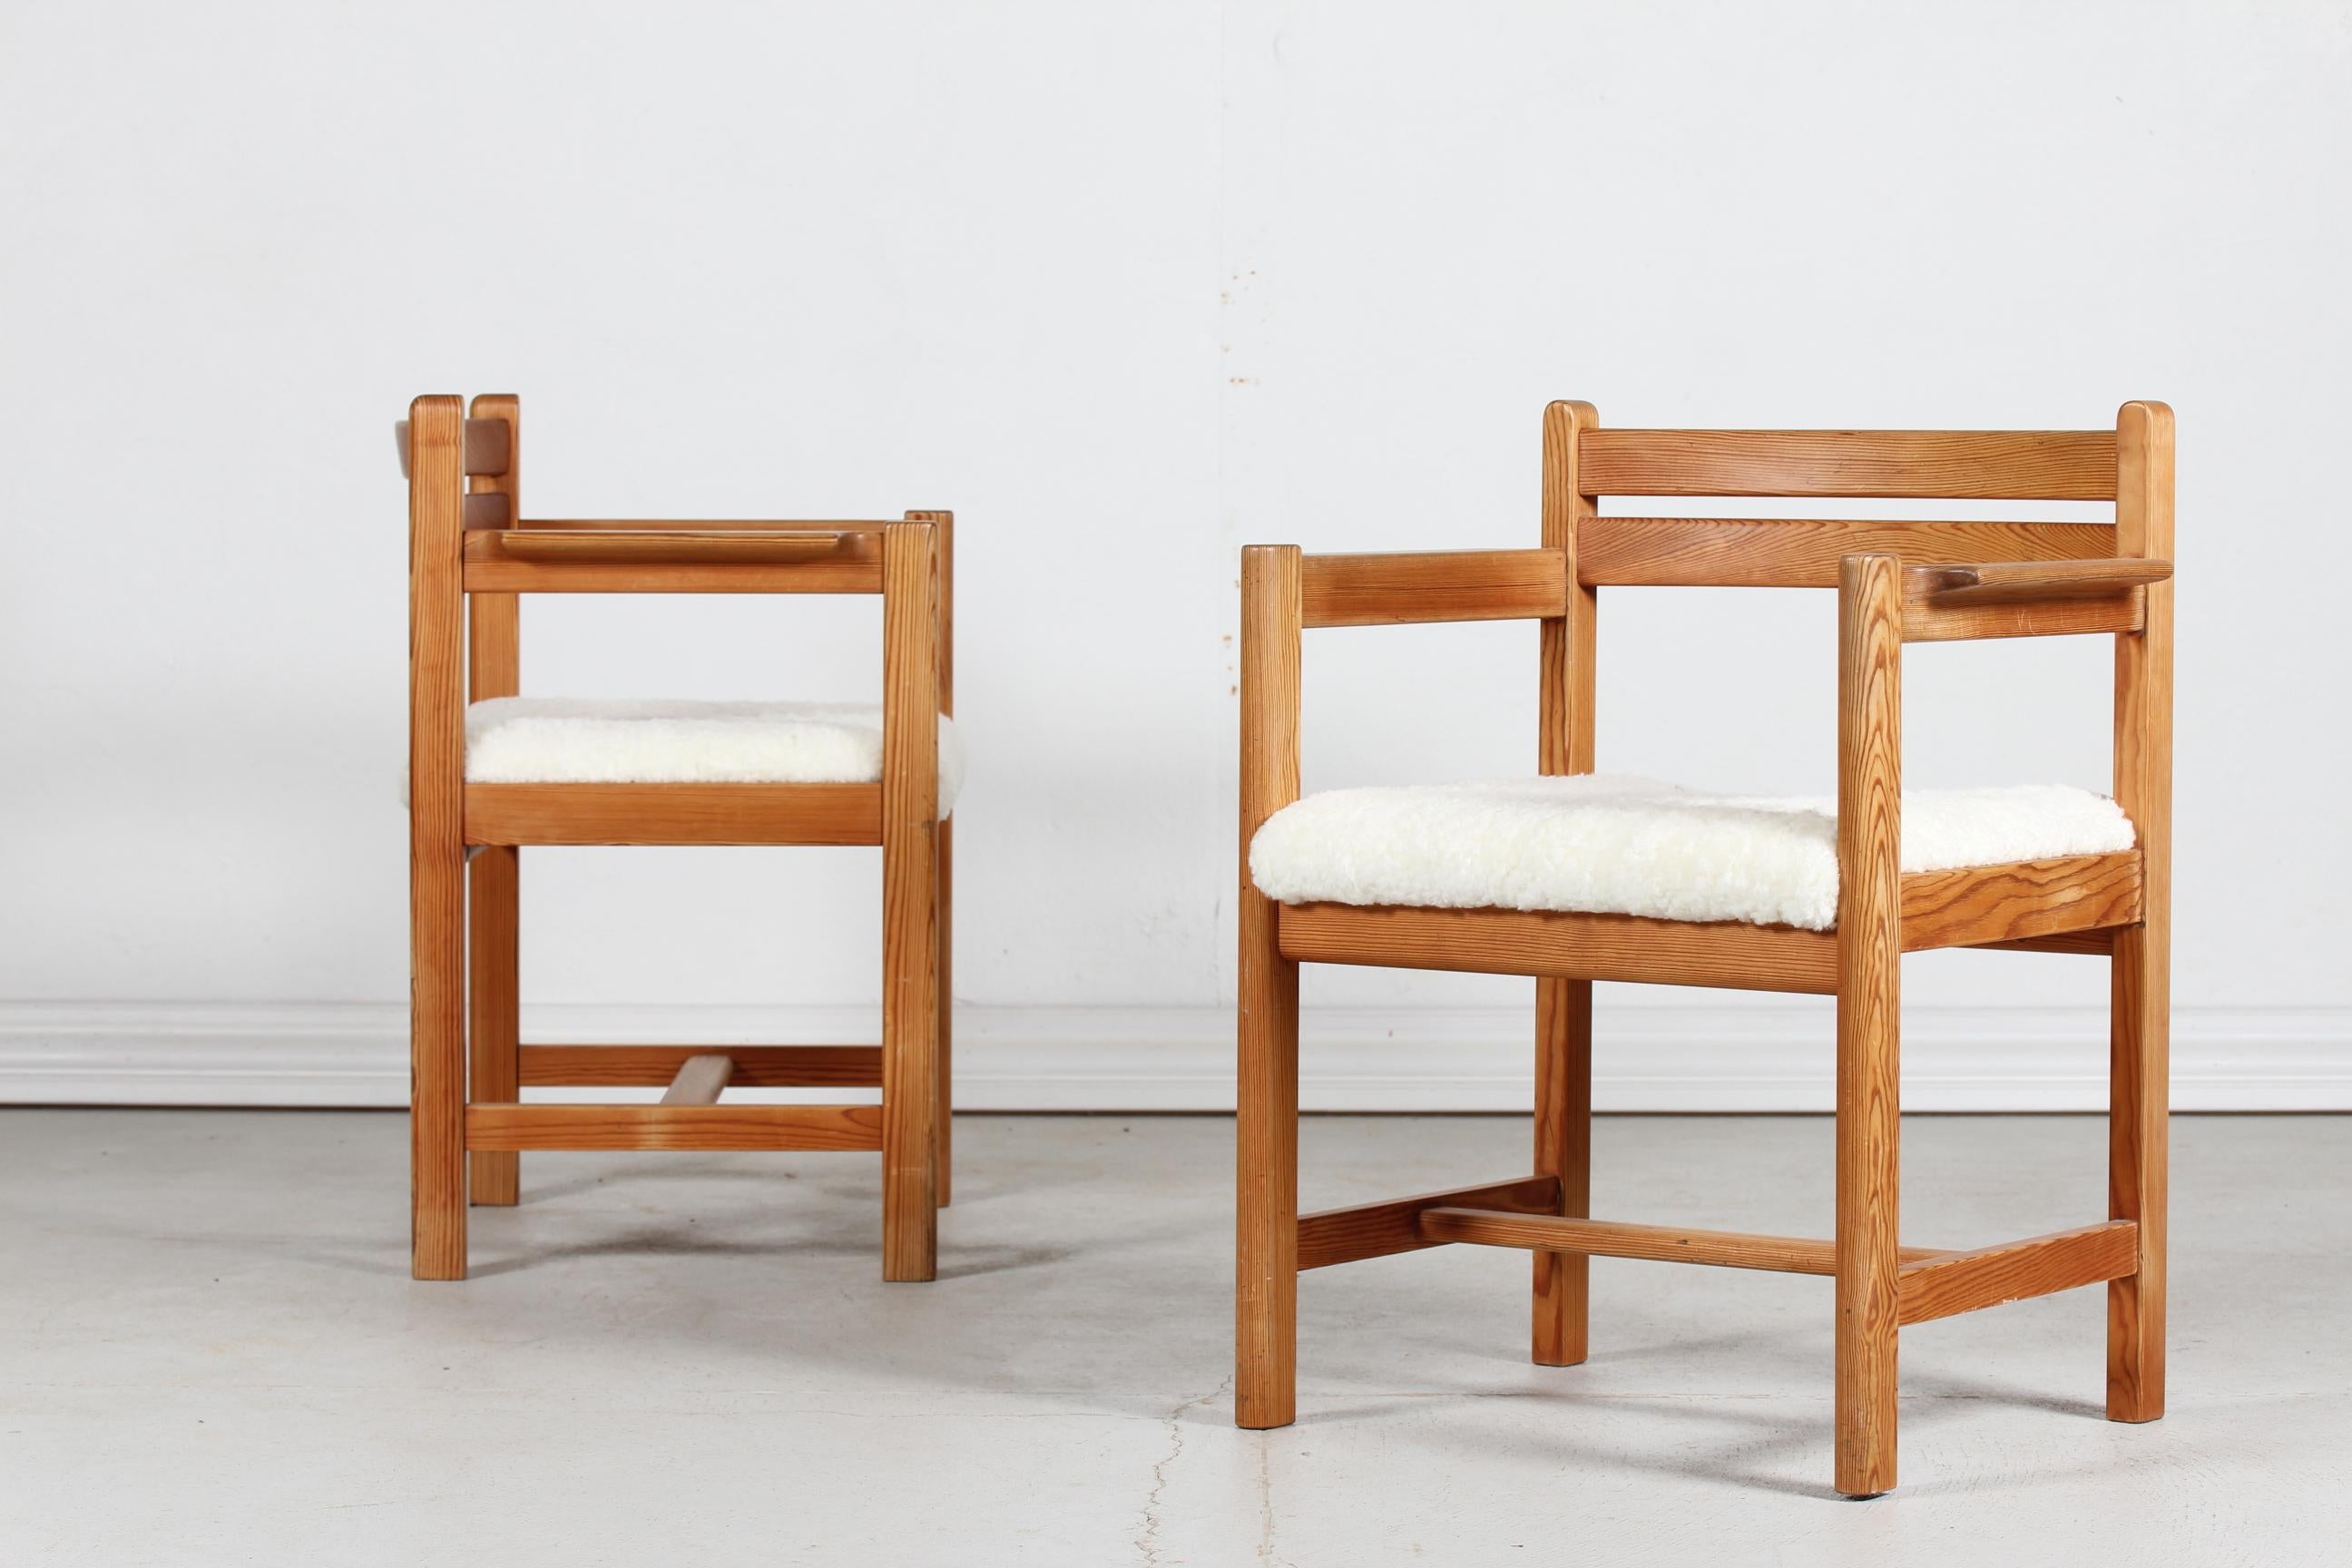 Set of two armchairs by the Danish furniture designer Børge Mogensen (1914-1972) model 503 from the Asserbo series.
Manufactured by Karl Andersson & Sons in Sweden in the 1970's

The chairs are made of solid pine with seats upholstred with new